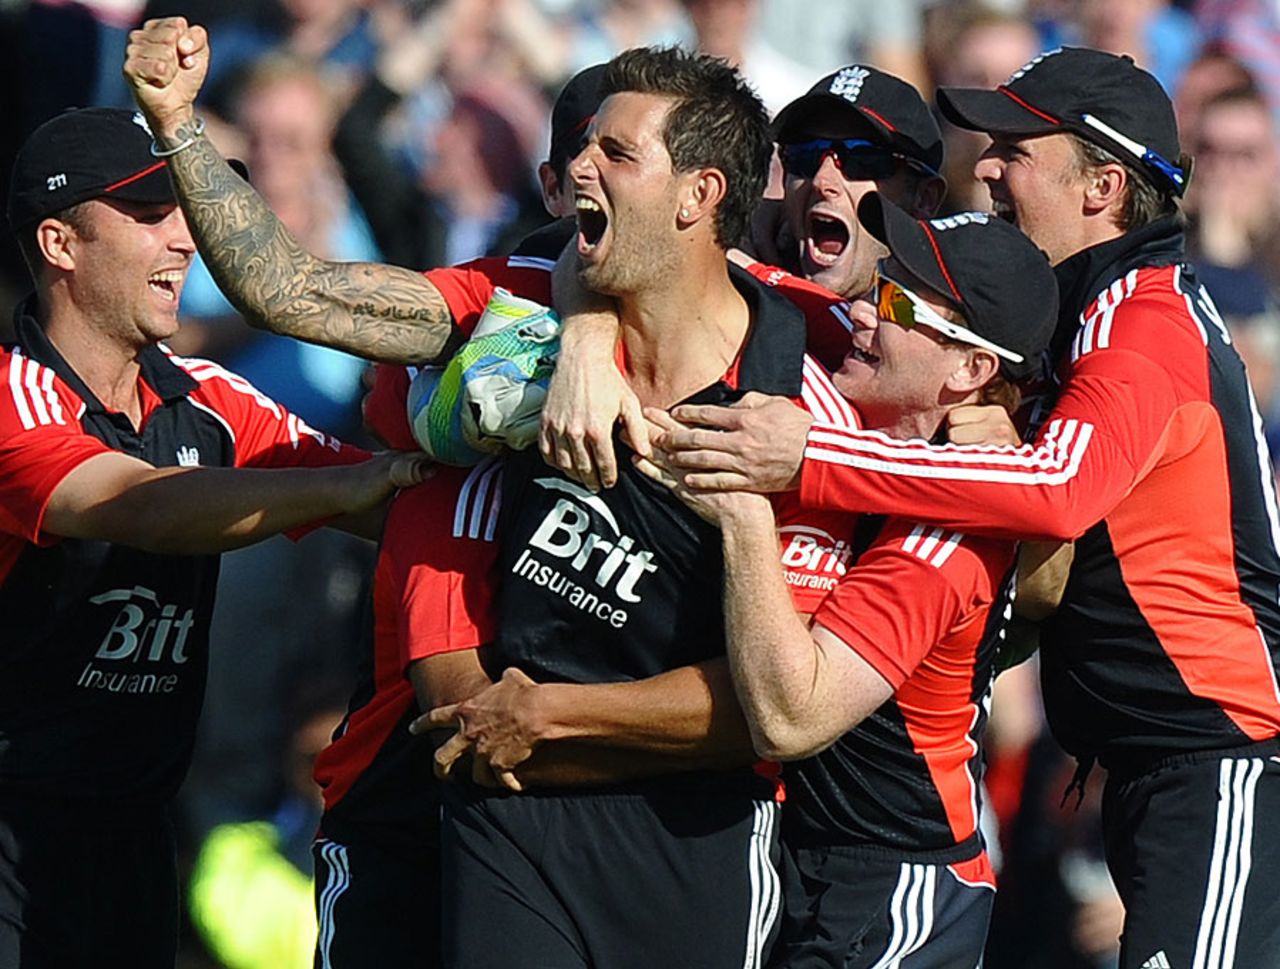 Jade Dernbach took two wickets in two balls to clinch England the match and series, England v Sri Lanka, 5th ODI, Old Trafford, July 9 2011